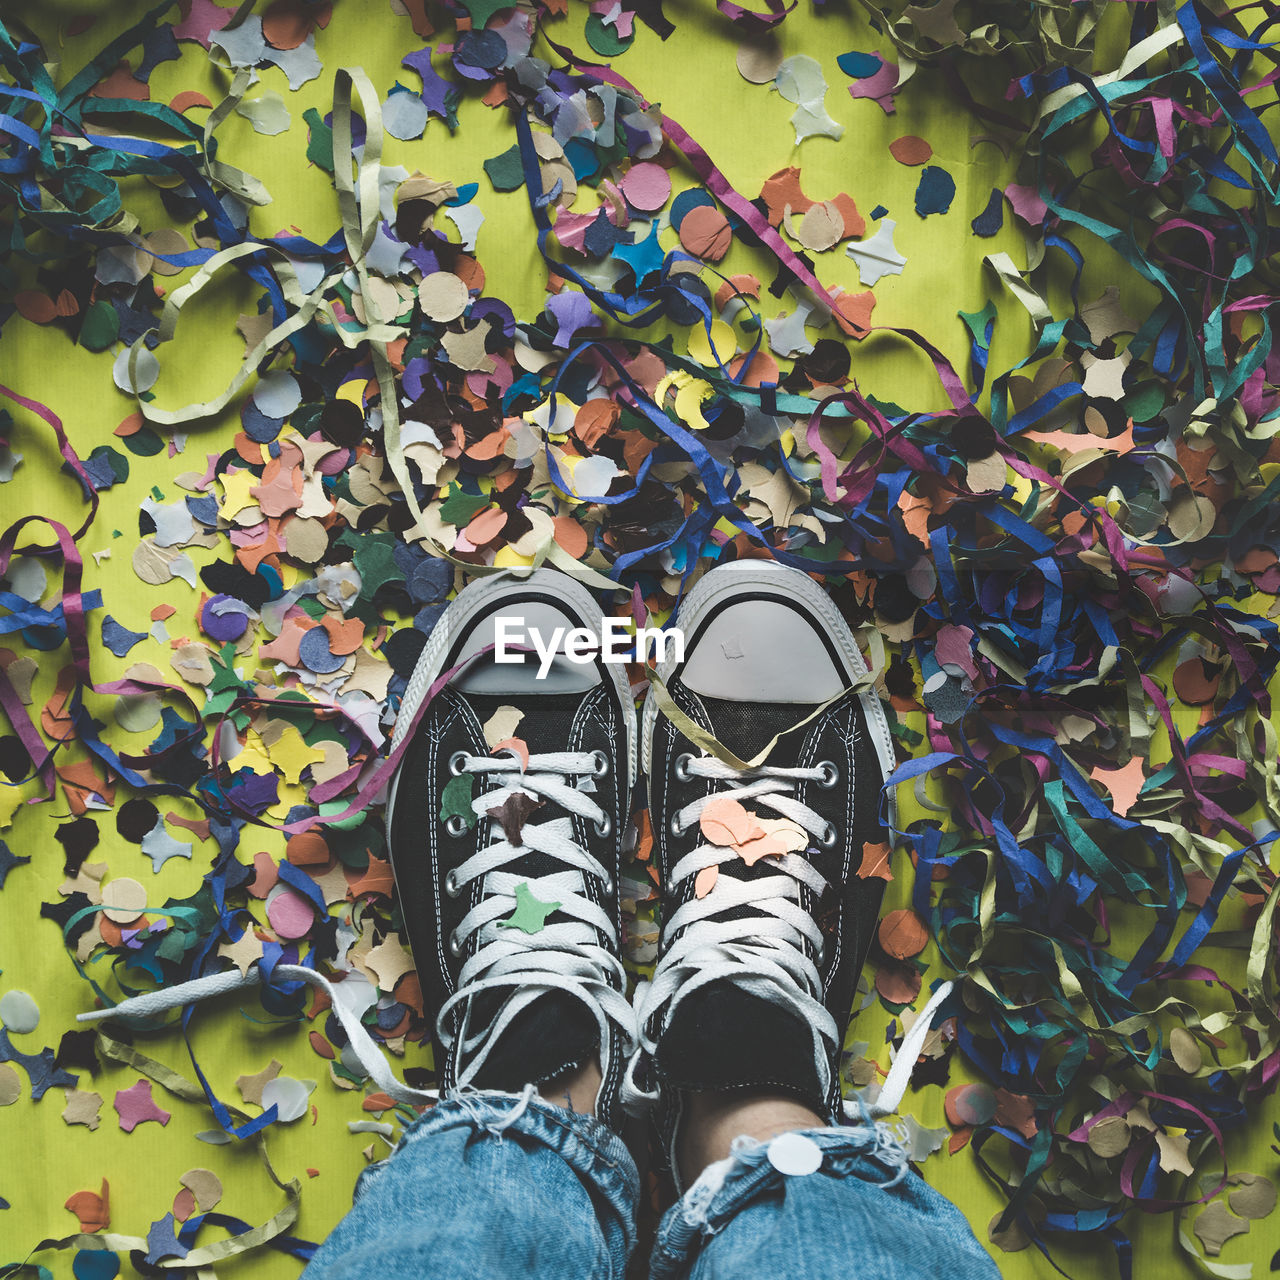 Feet seen from above on a floor full of colorful confetti